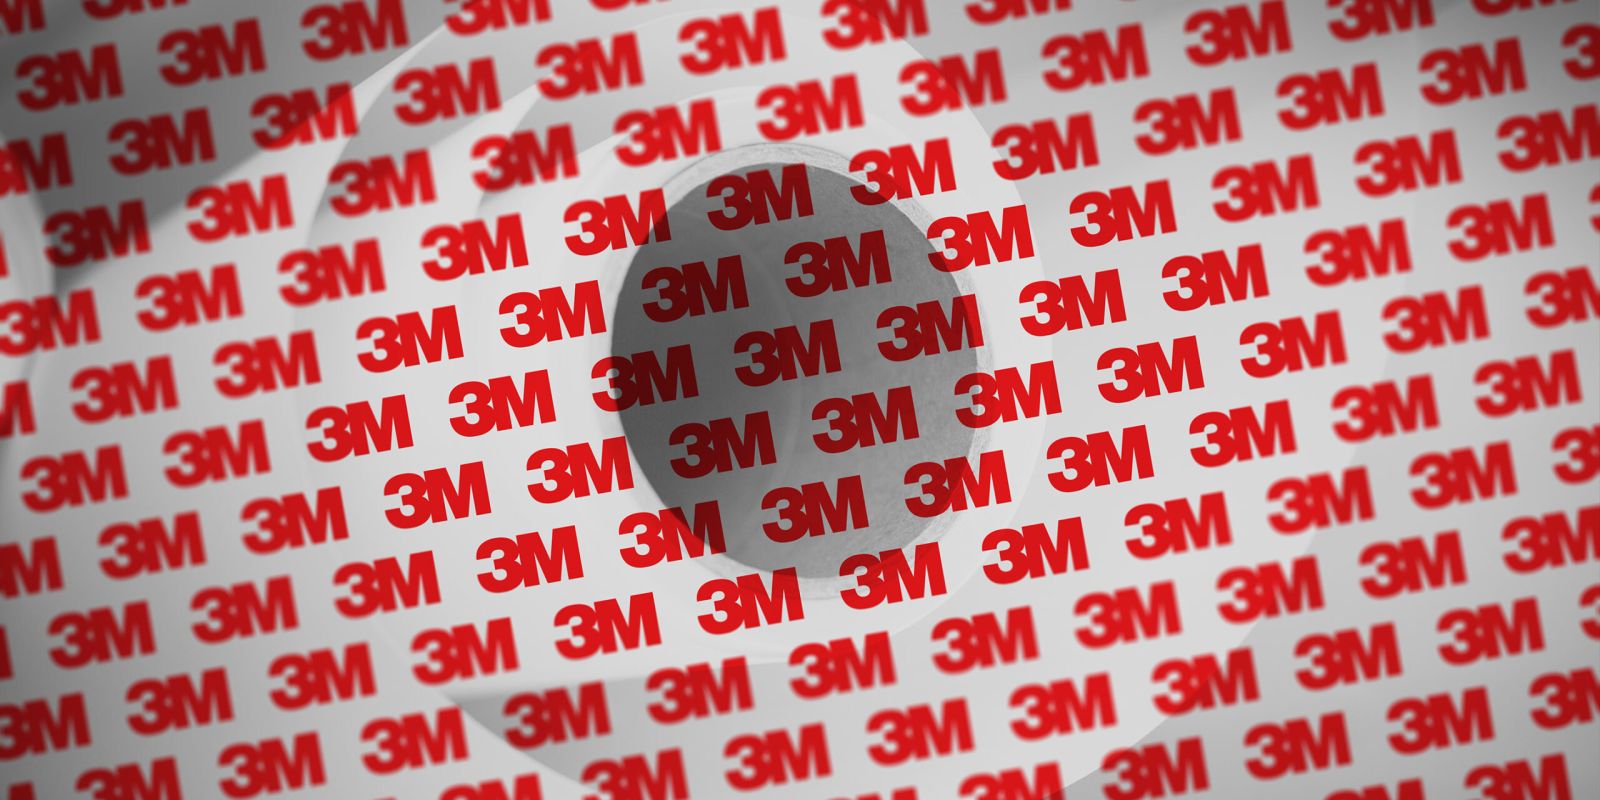 3M: HMMM, why is it 3 to the M?